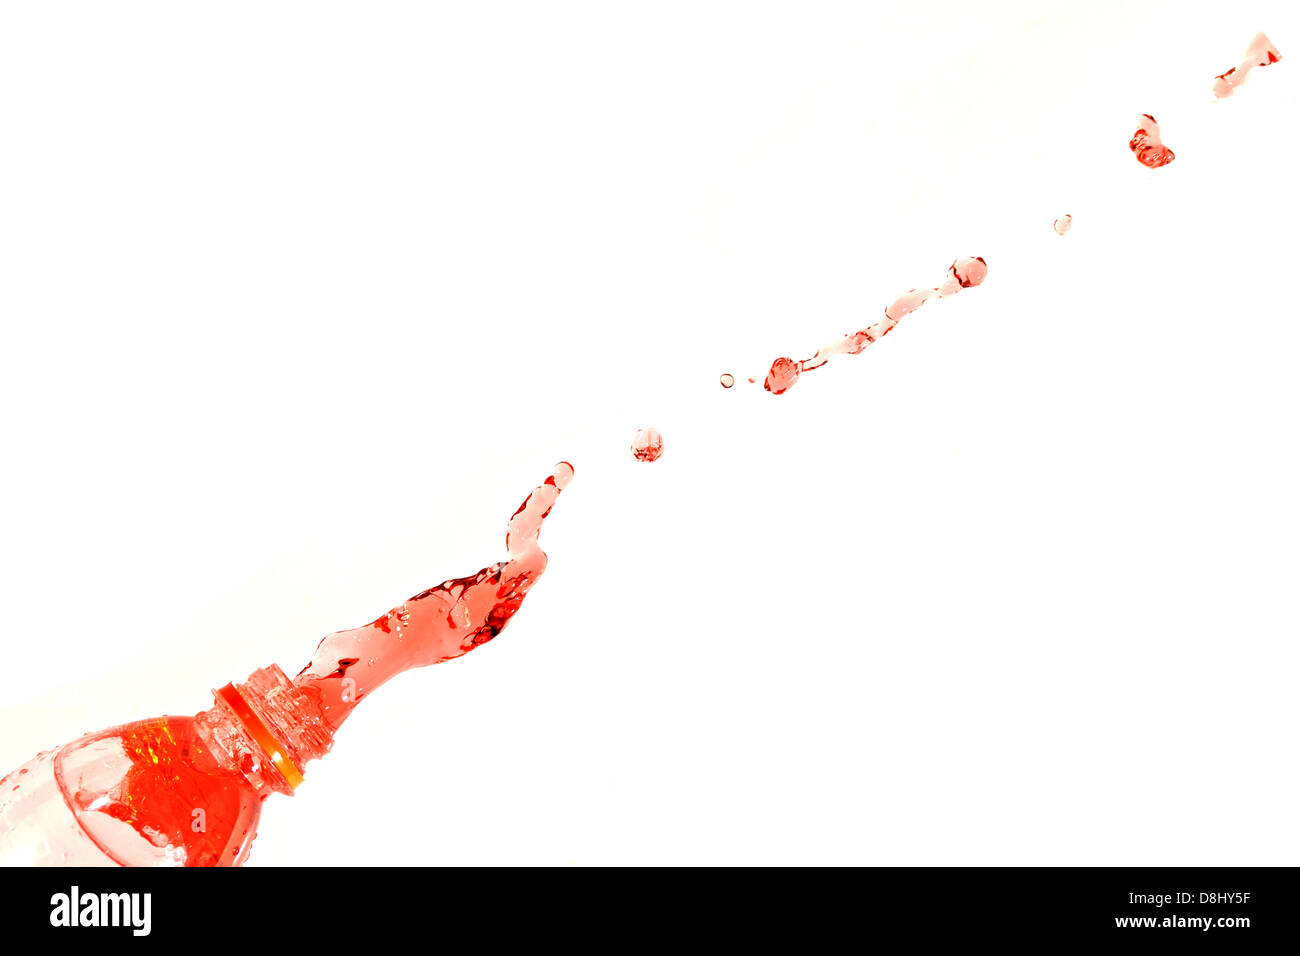 The Red water that spread out from the bottle on The white Background. Stock Photo